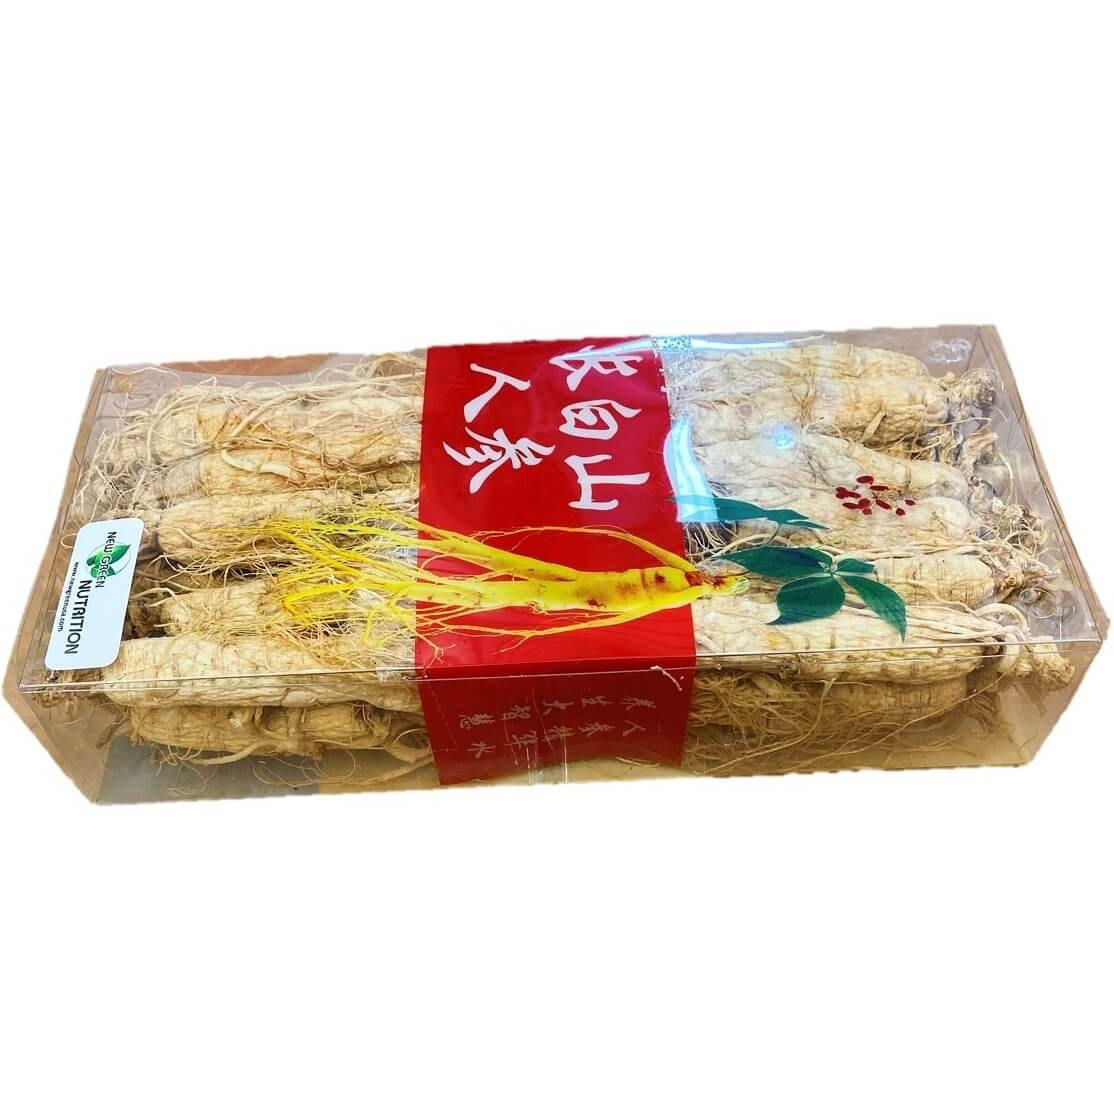 Changbai Mountain Premium Dried White Ginseng Root (1lb Gift Box) - Buy at New Green Nutrition